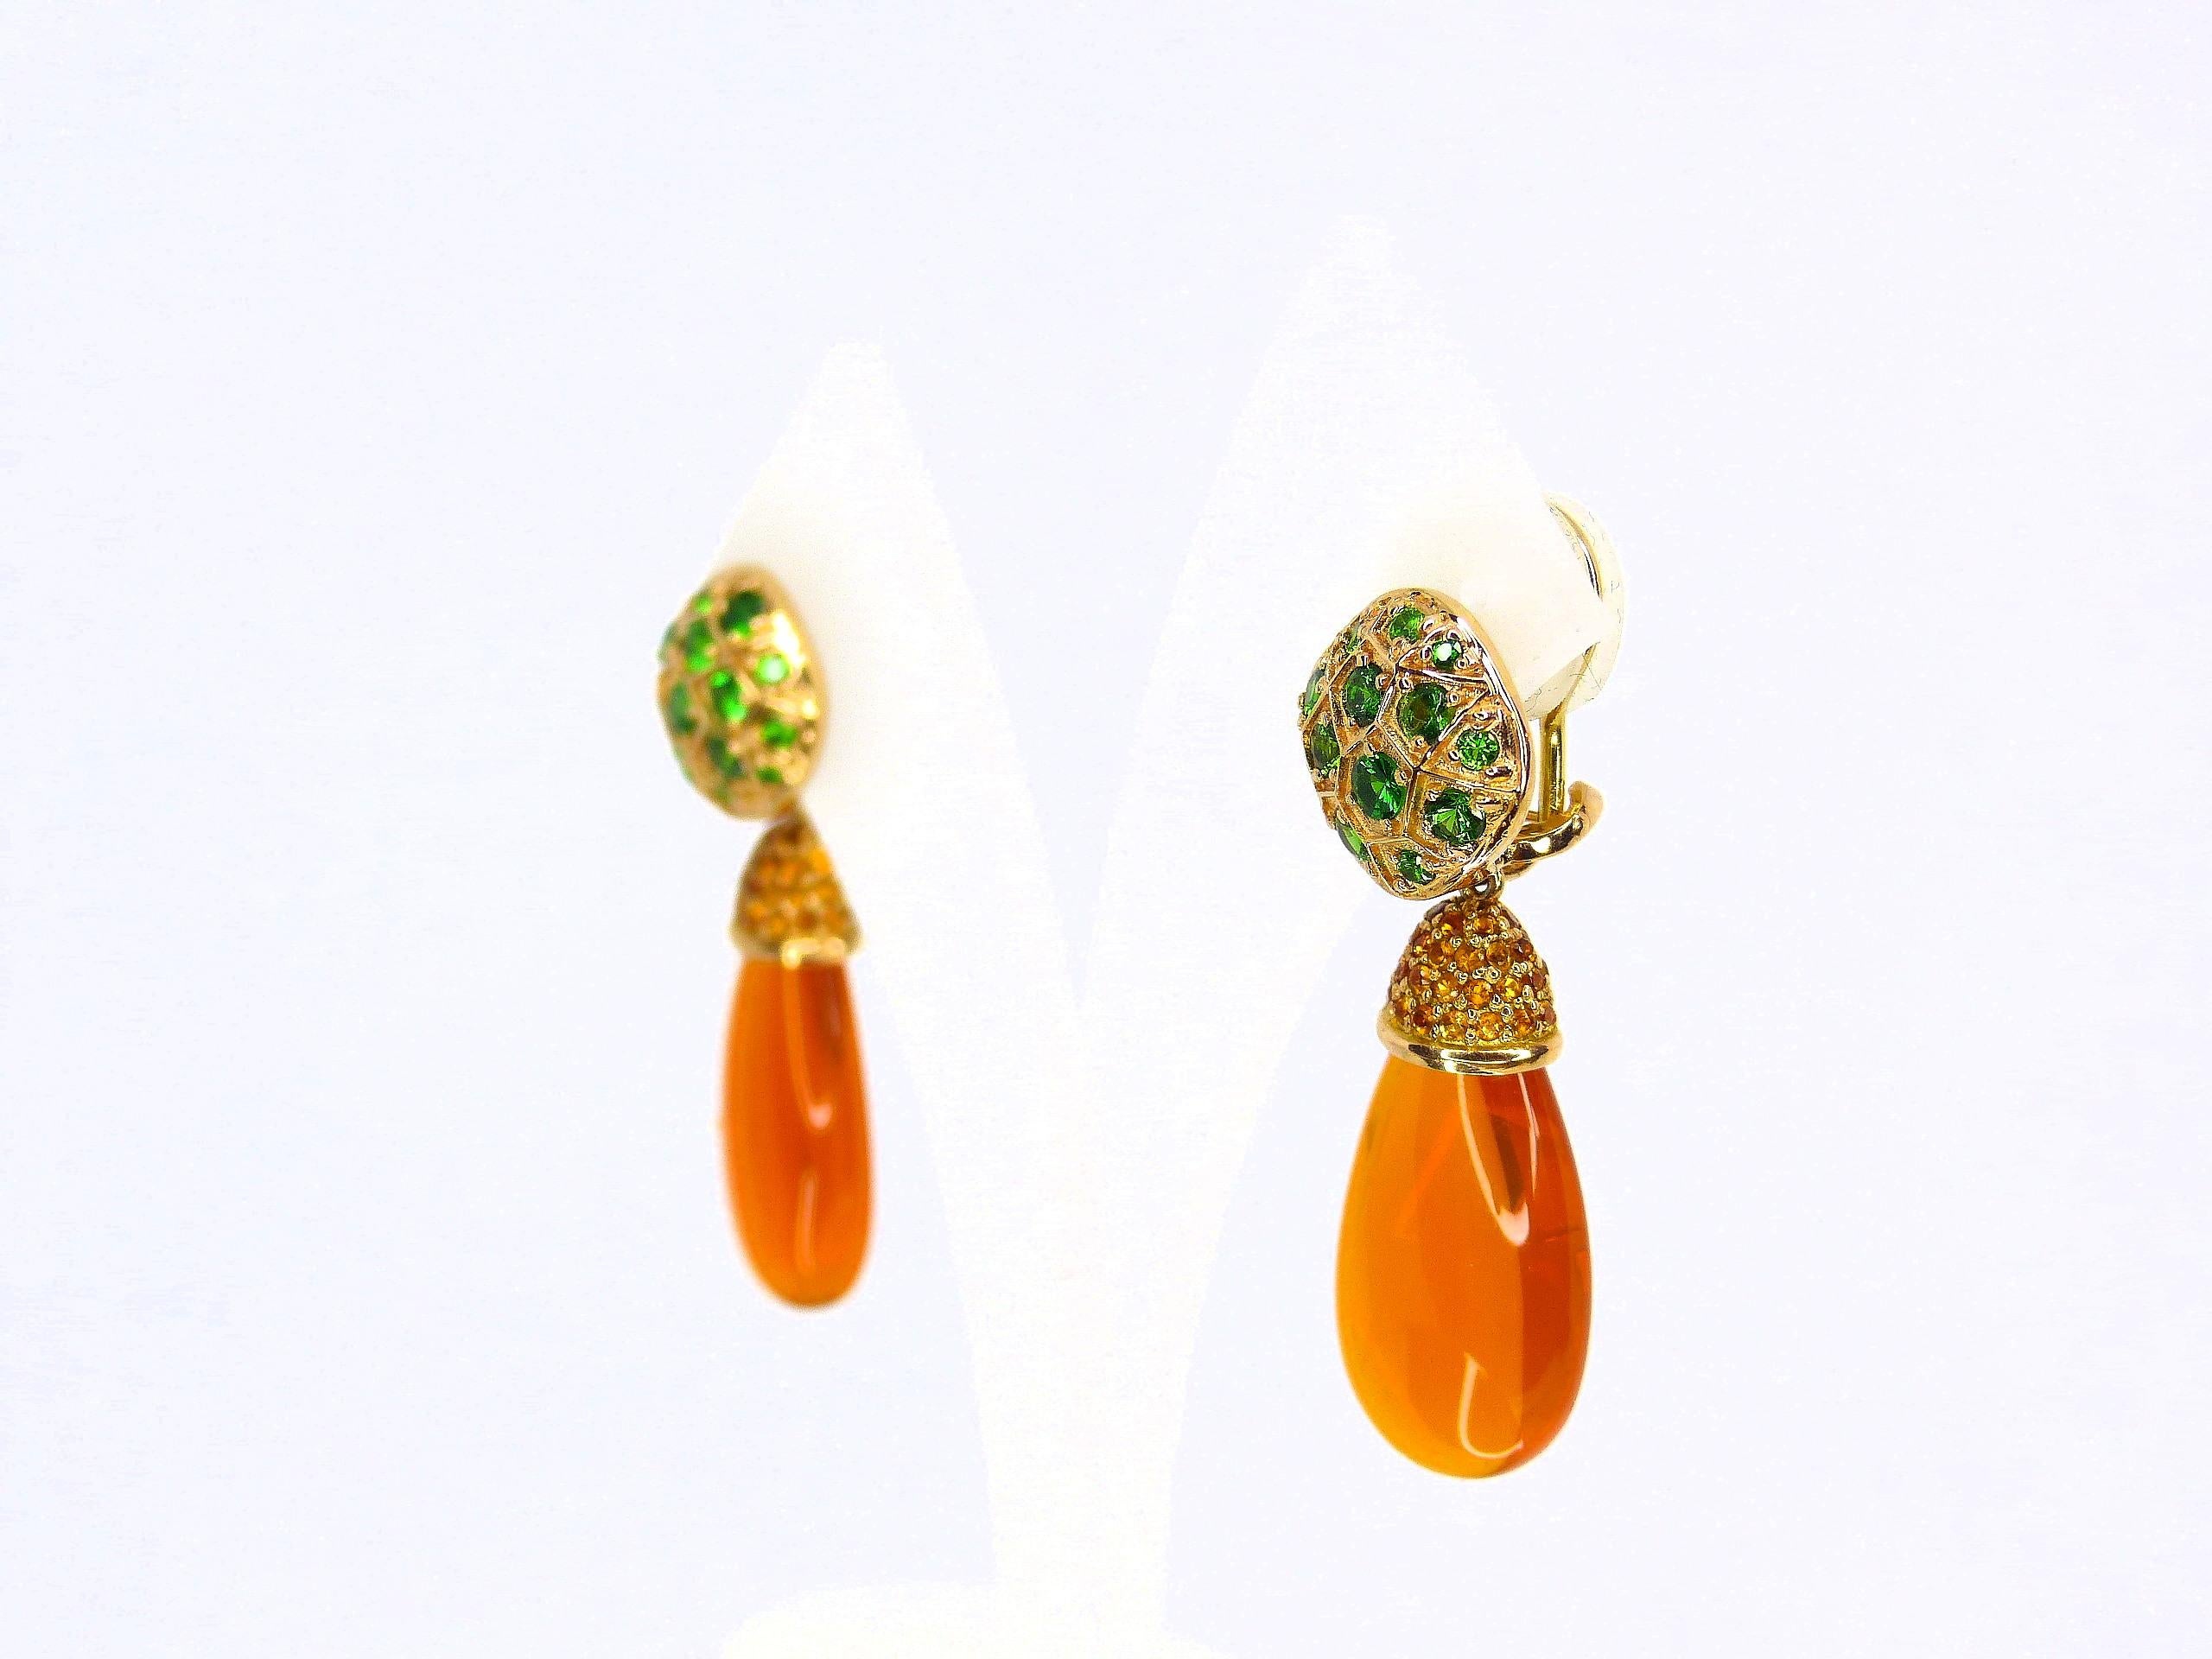 Thomas Leyser is renowned for his contemporary jewellery designs utilizing fine gemstones.

This 18k red gold (3.45g) pair of earrings is set with 2x fine Mexican Fireopal Brioletts (28x13x8mm, 29.49ct) + 70x Mandarin Garnets (round, 1.3mm, 0.70ct)